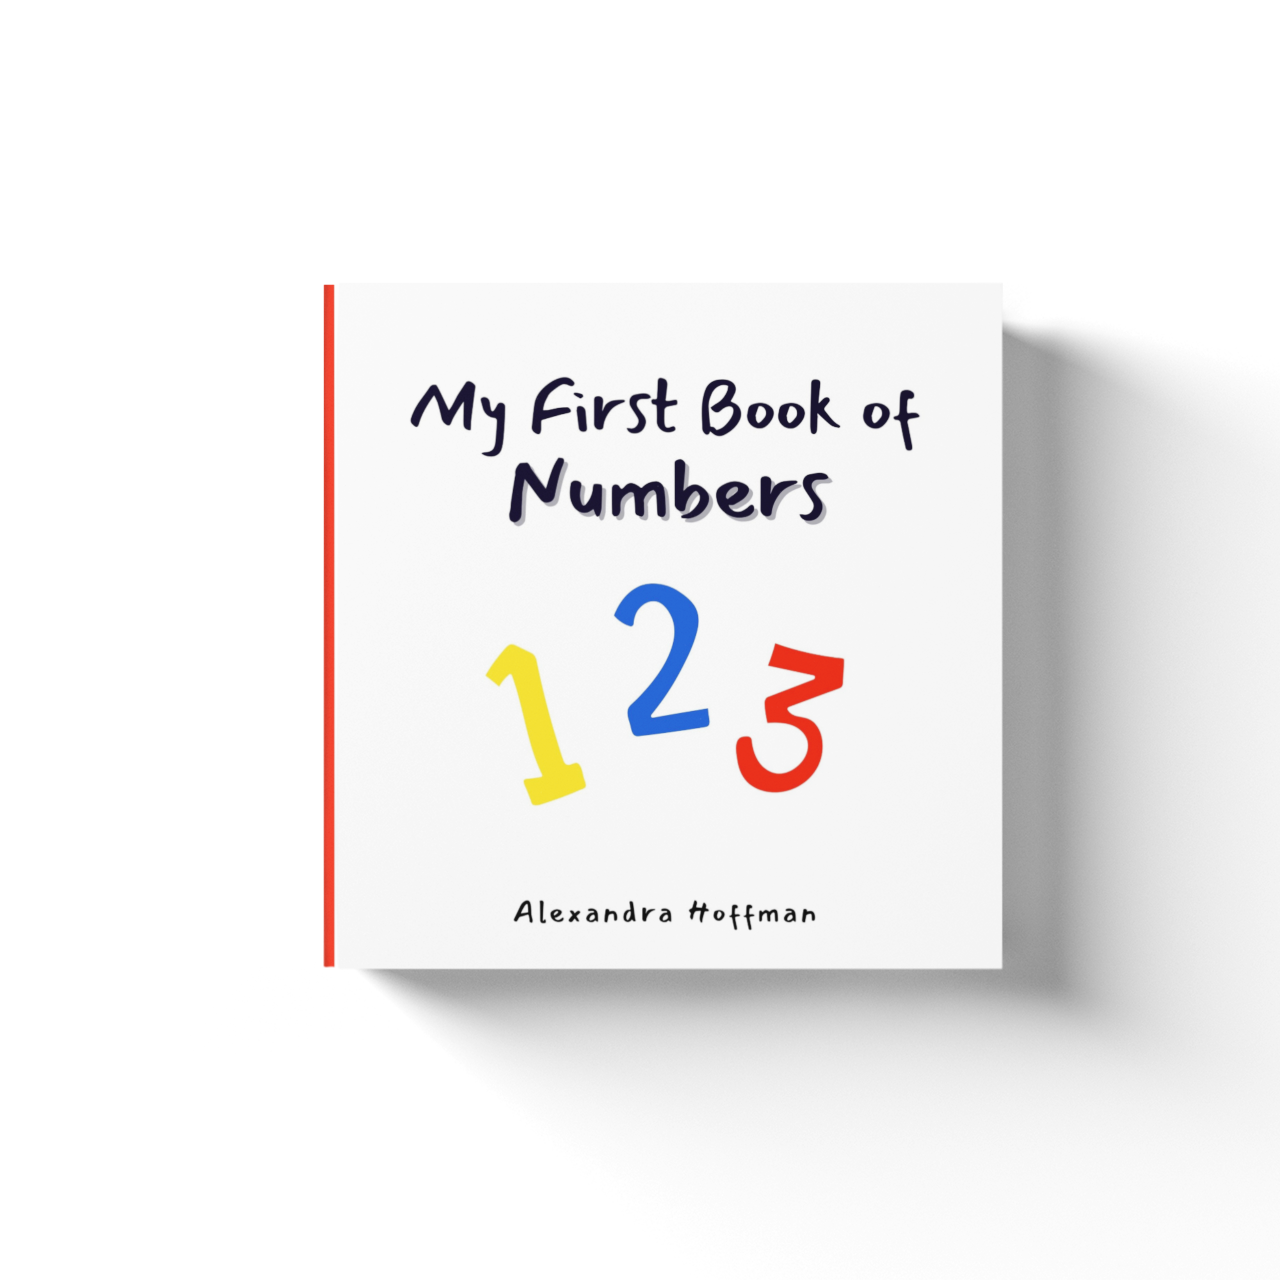 minimal-mockup-featuring-a-hardcover-square-book-placed-on-a-plain-color-surface-1545-el (4).png